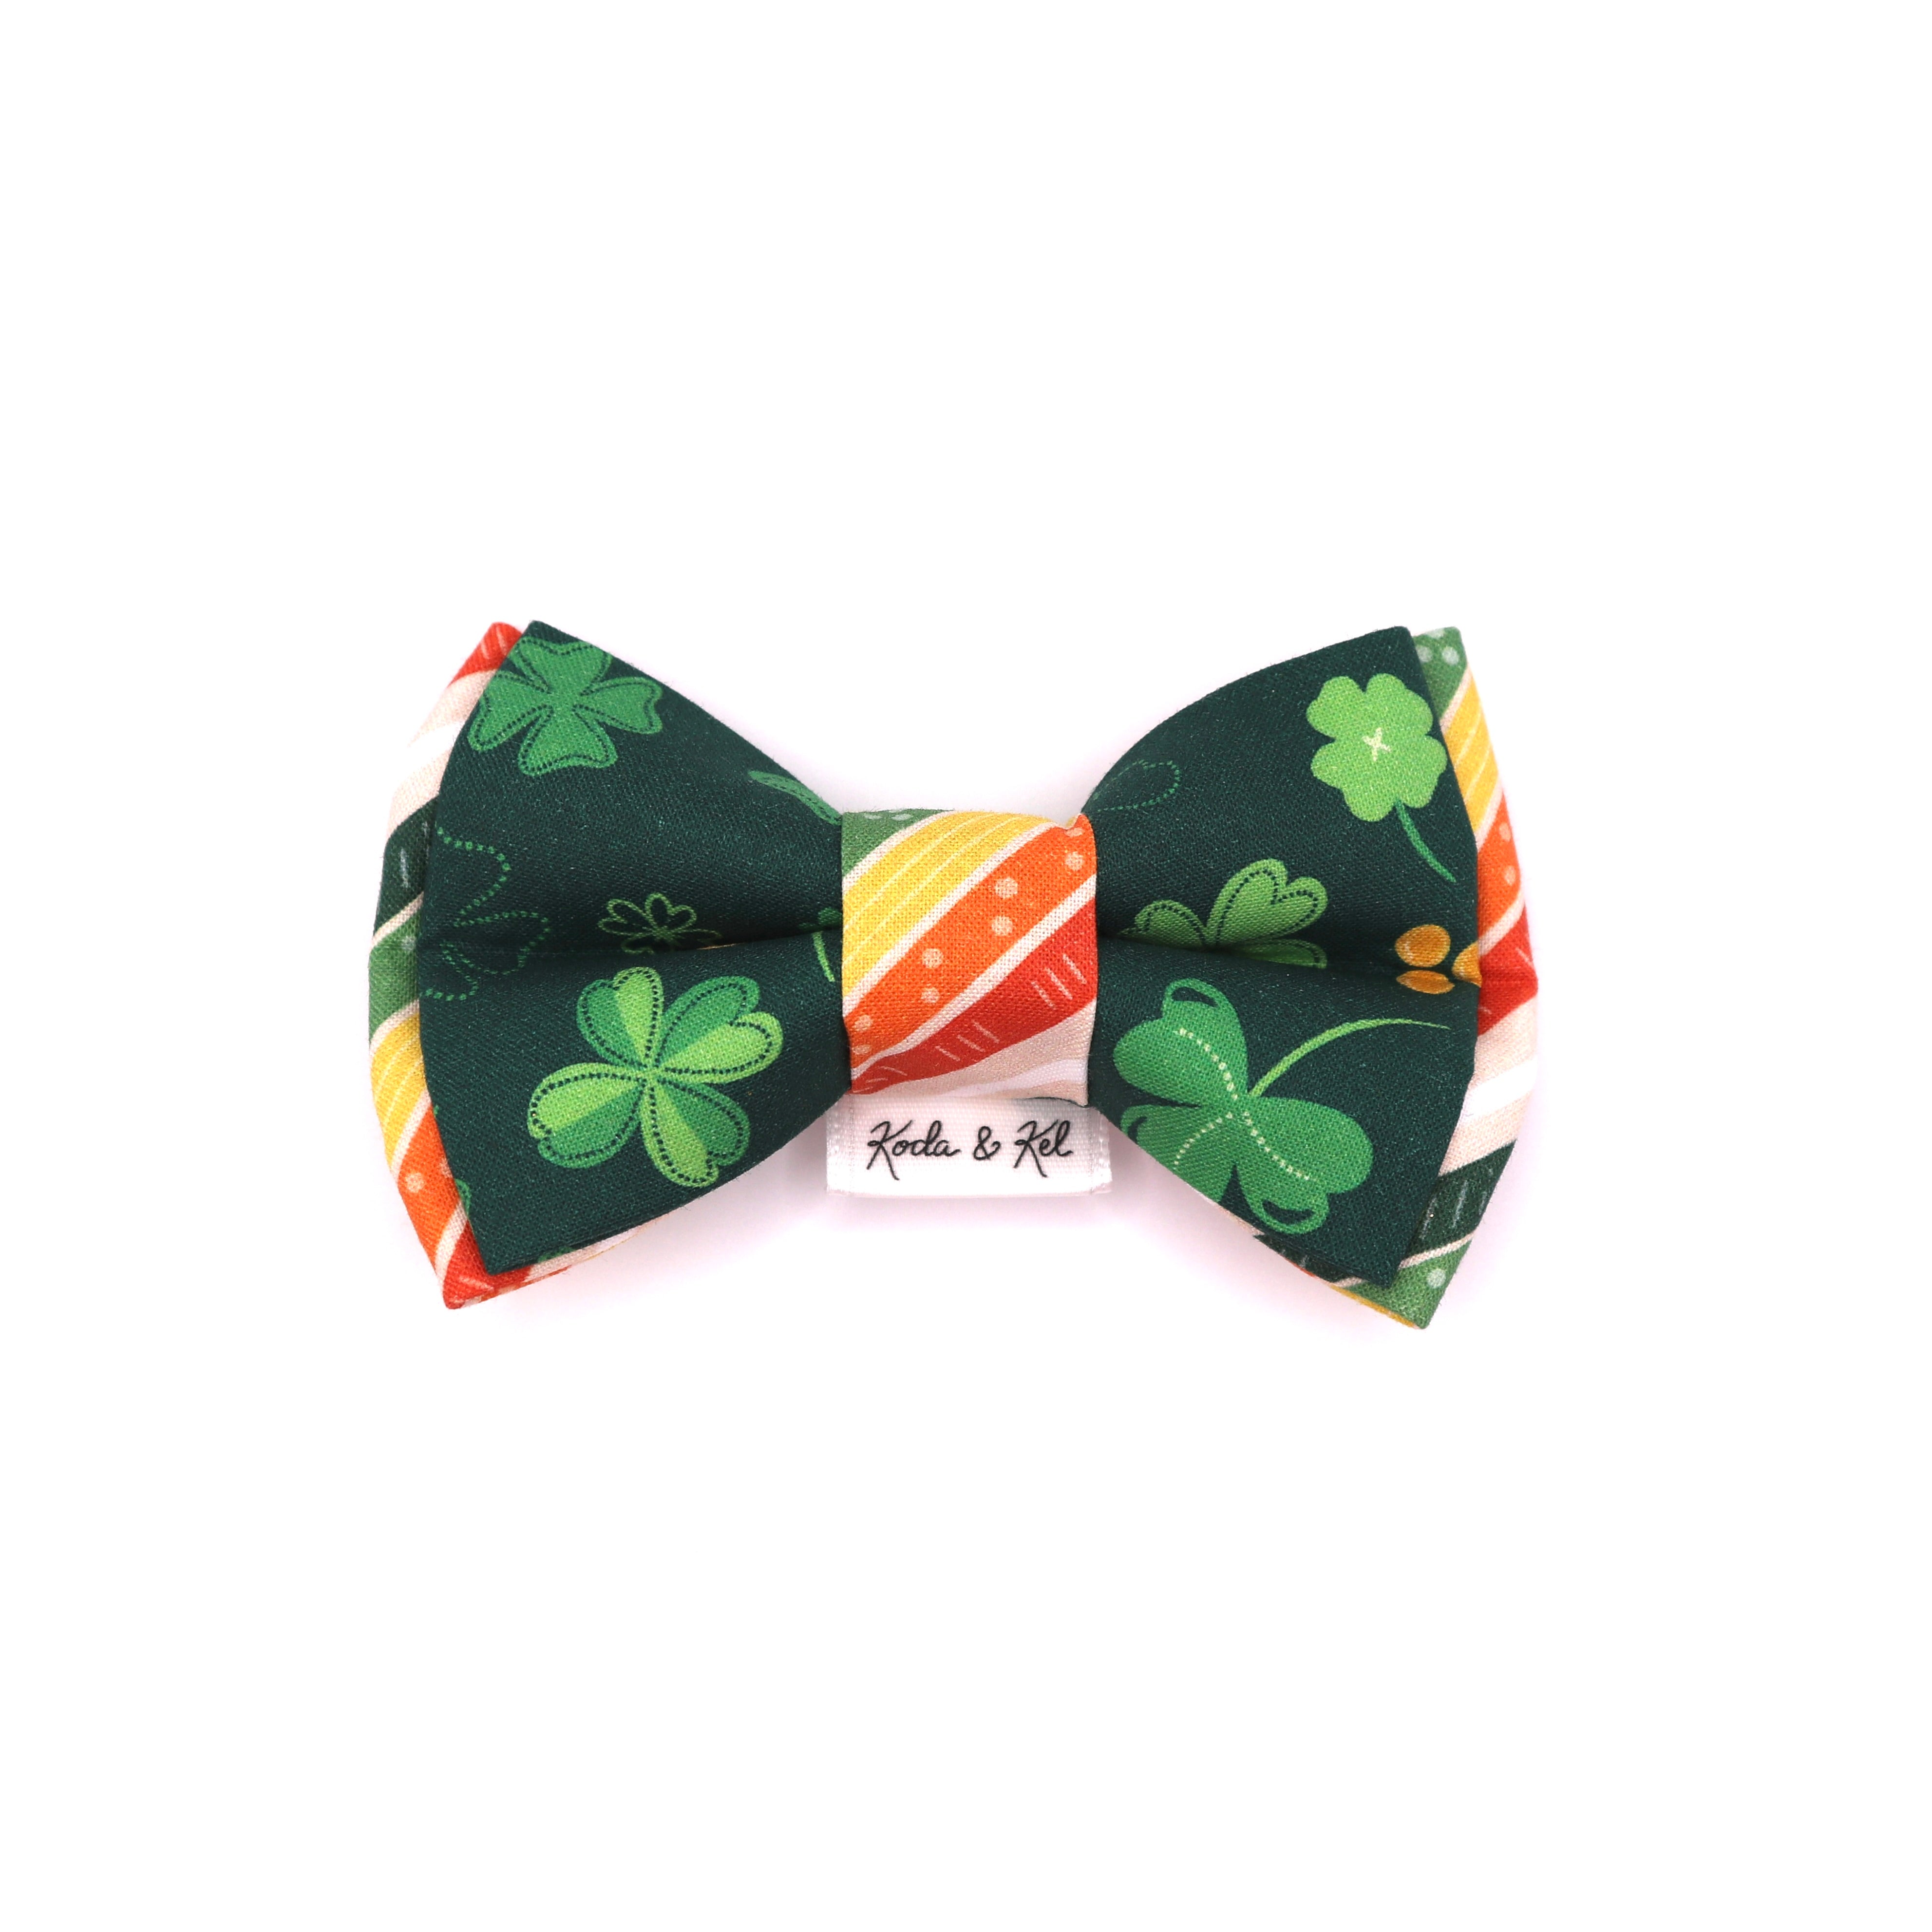 End of the Rainbow Bow Tie